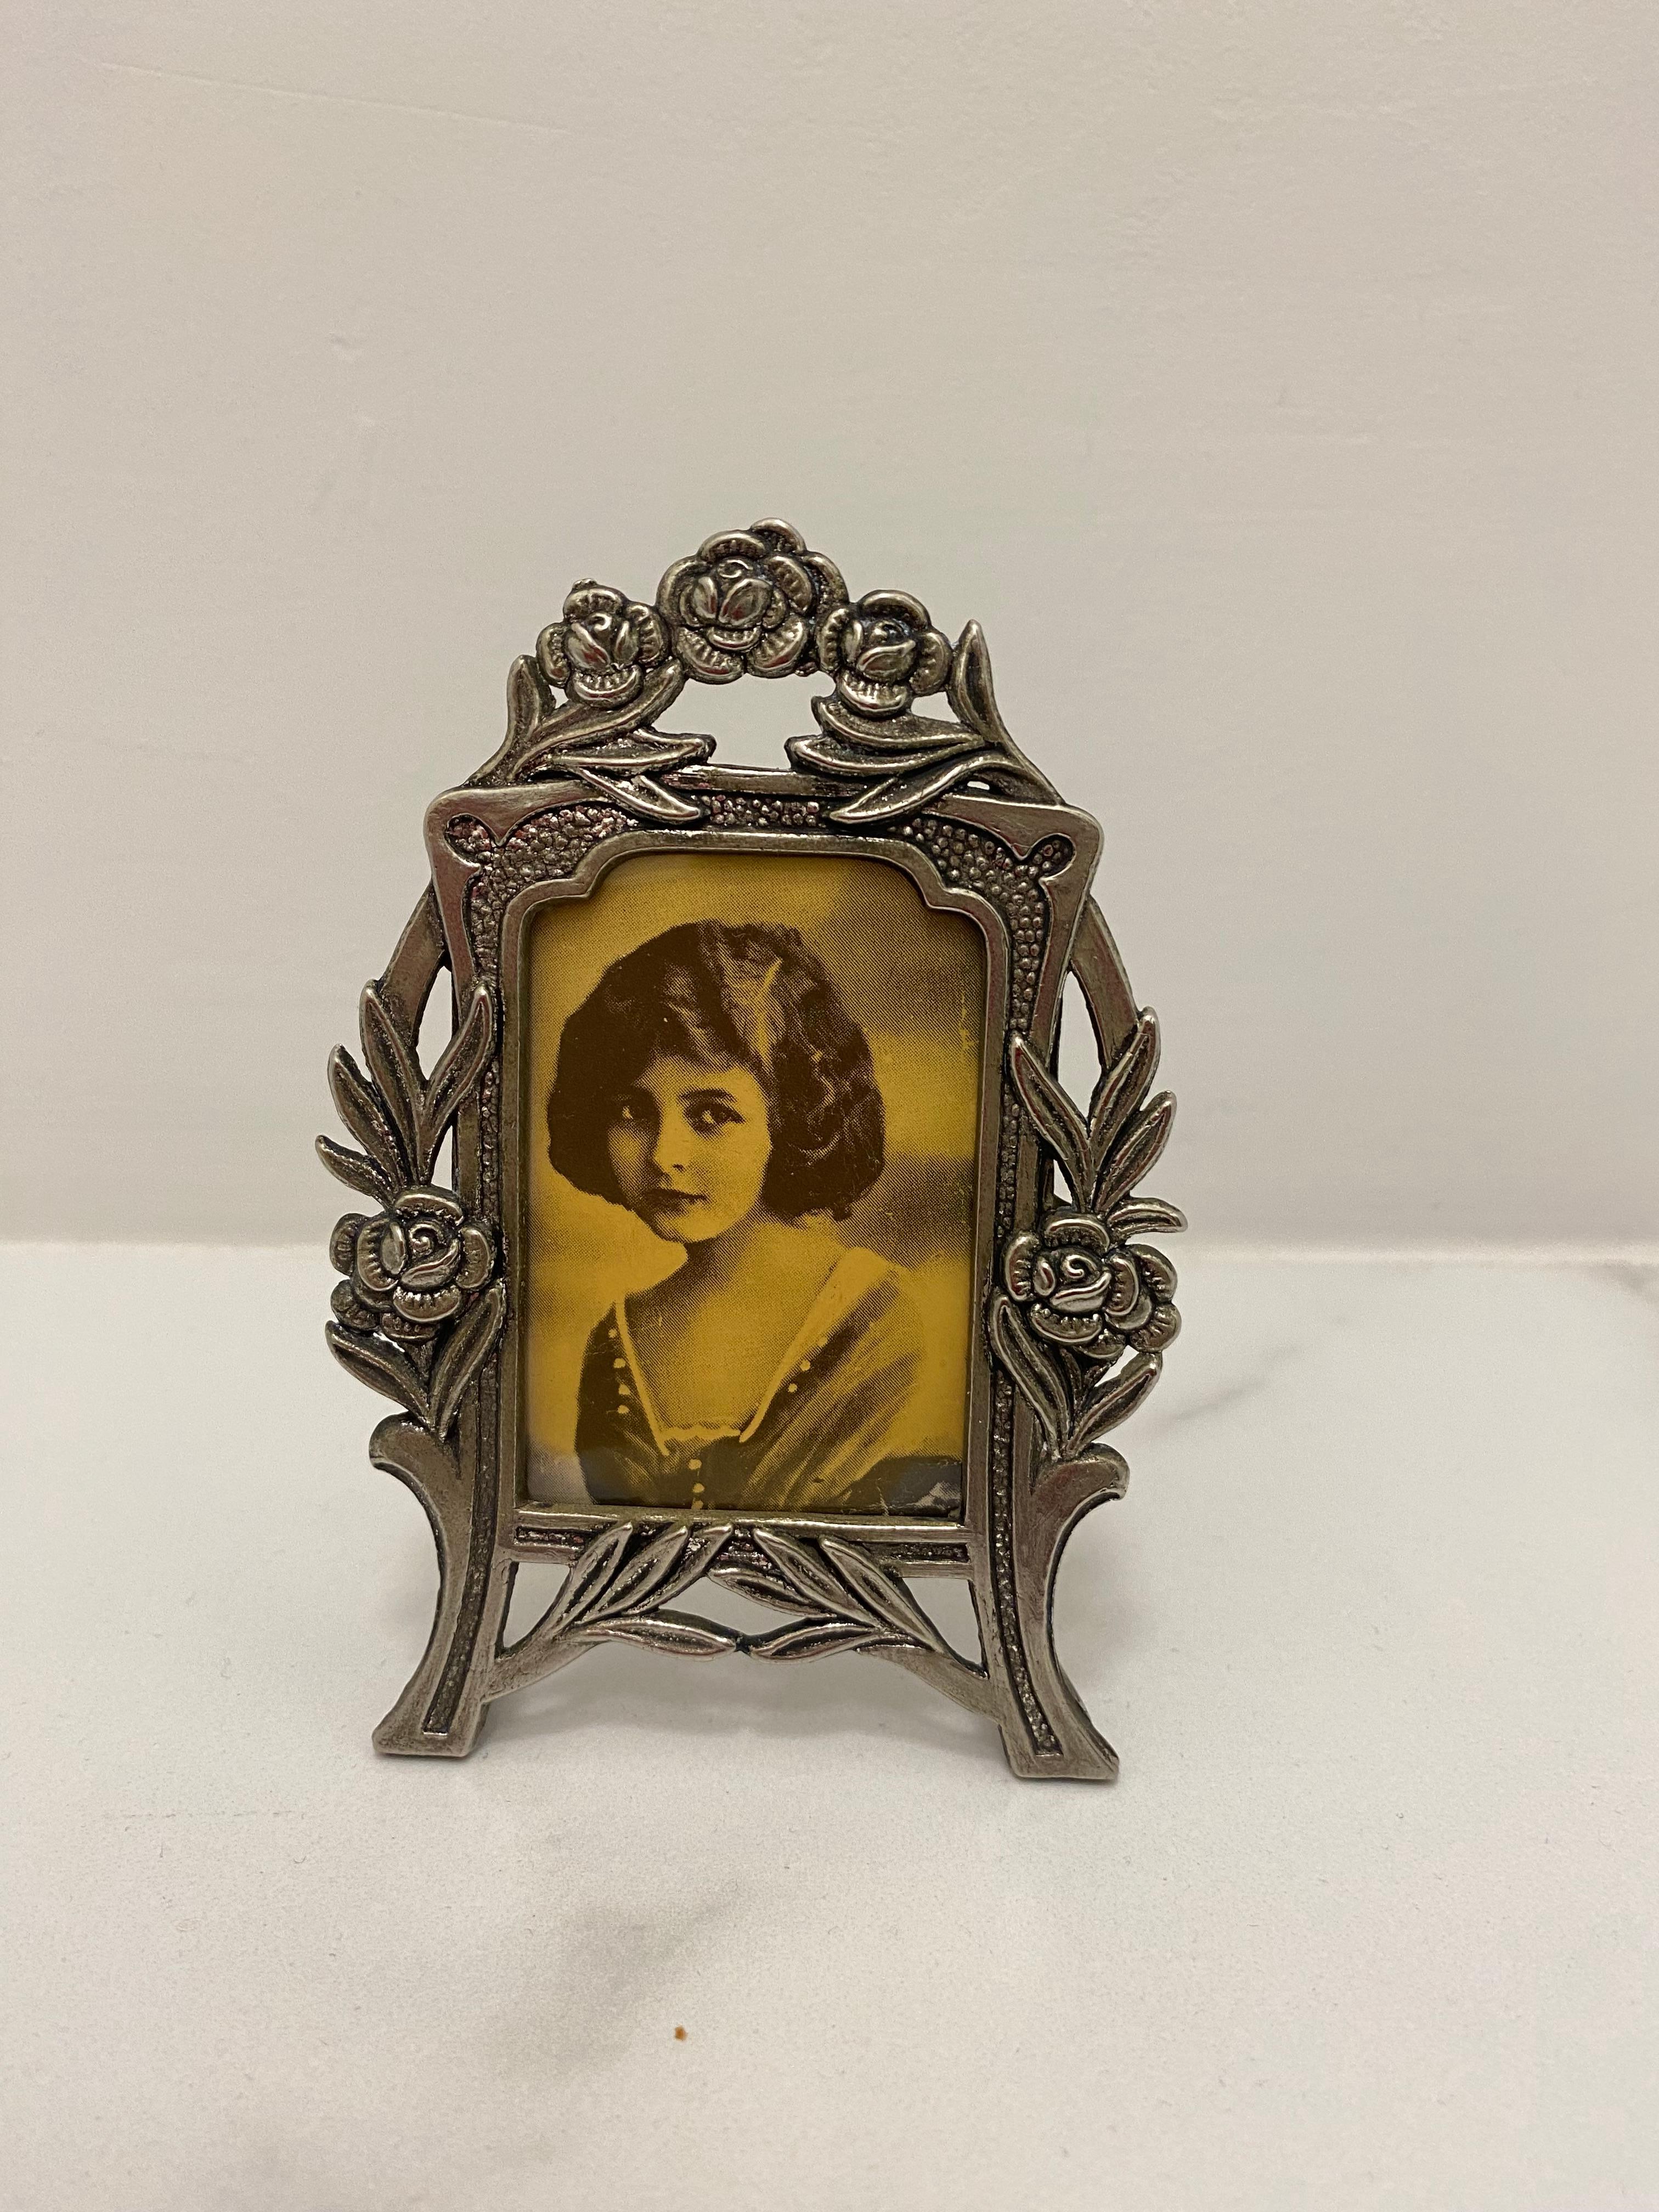 Very nice decorative photo frame in 925 silver. Probably made in France.